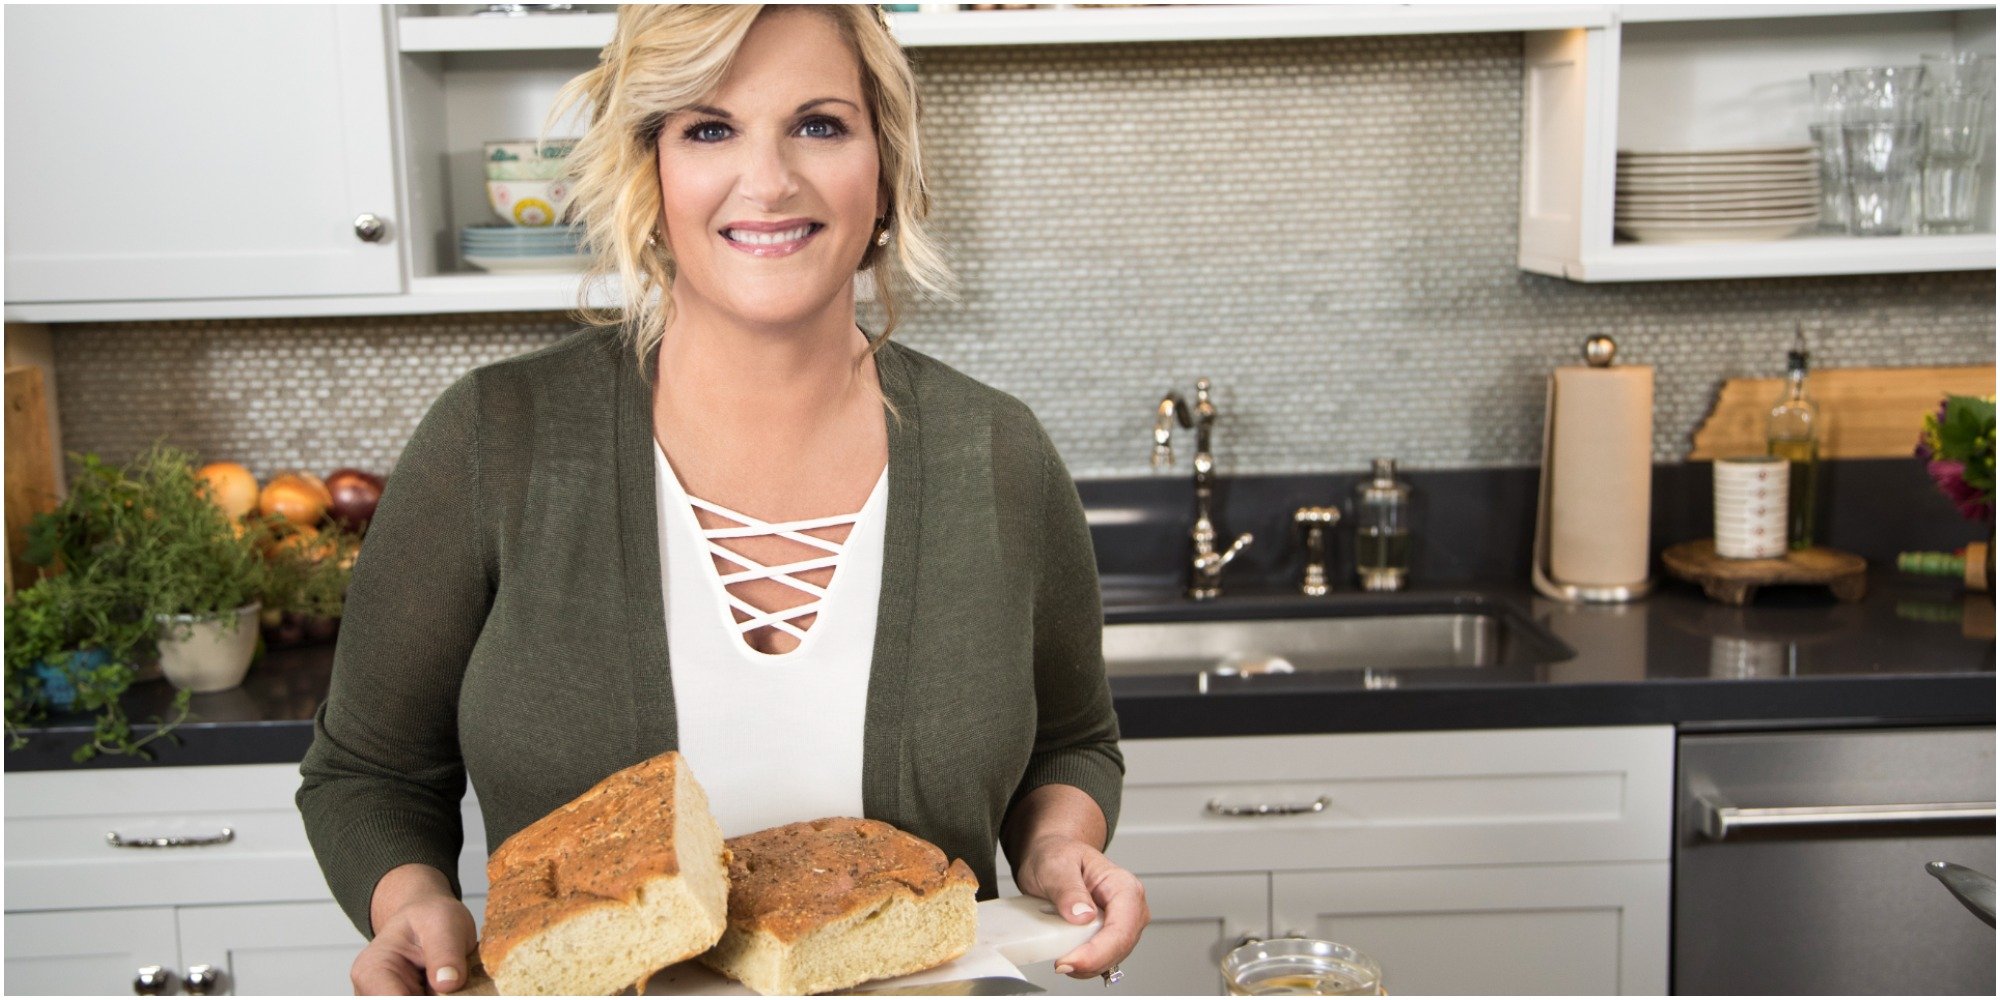 Trisha Yearwood shows off a finished dish on the set of her Food Network series.